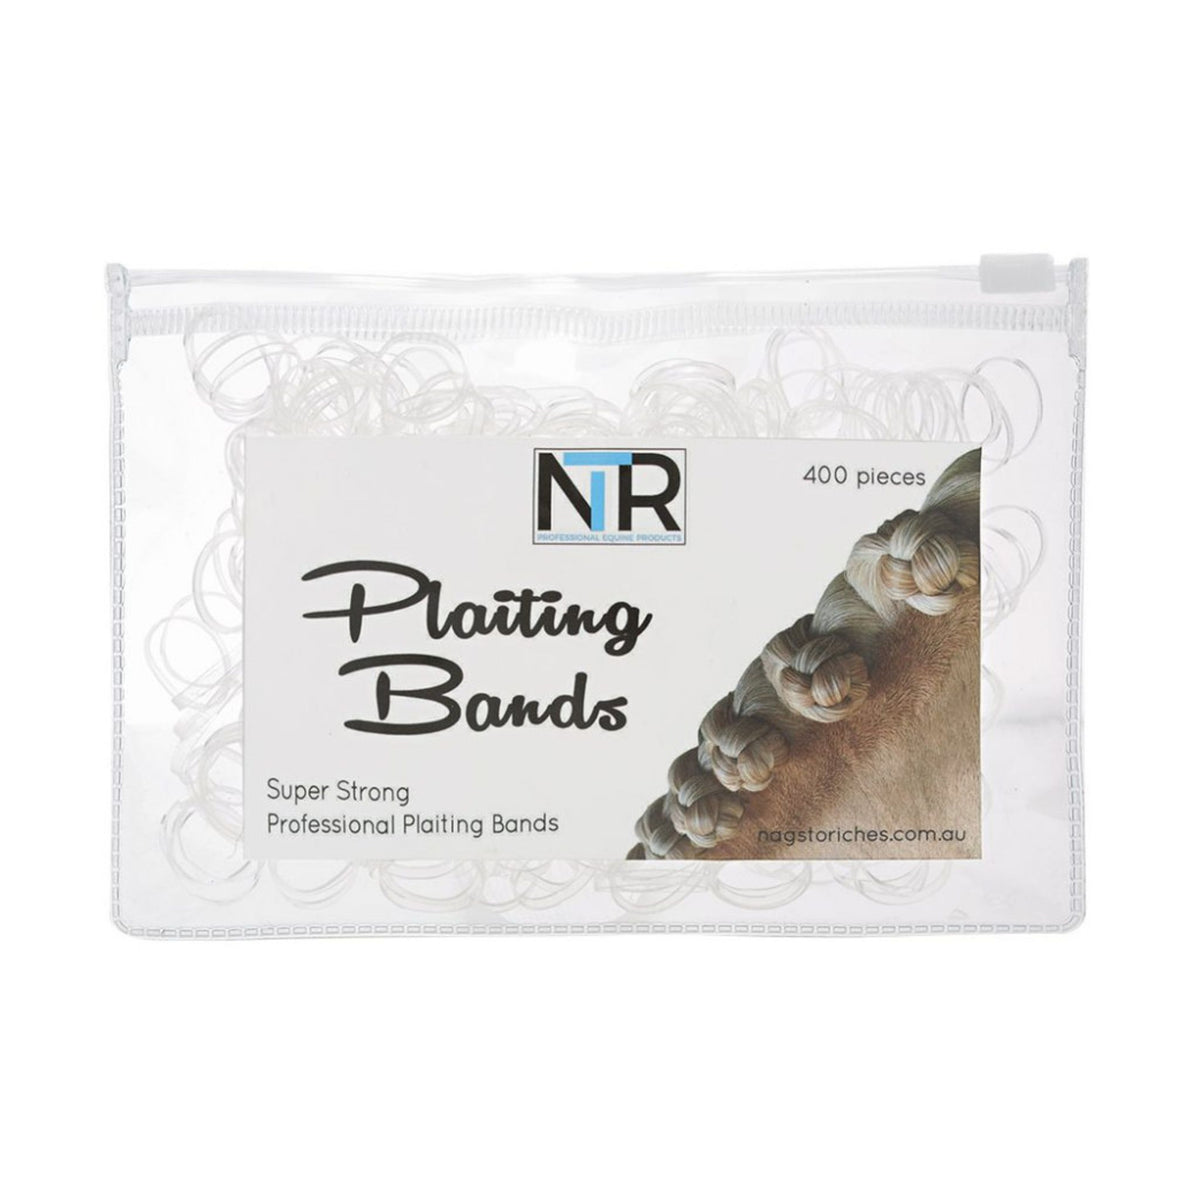 clear plaiting bands in clear bag.